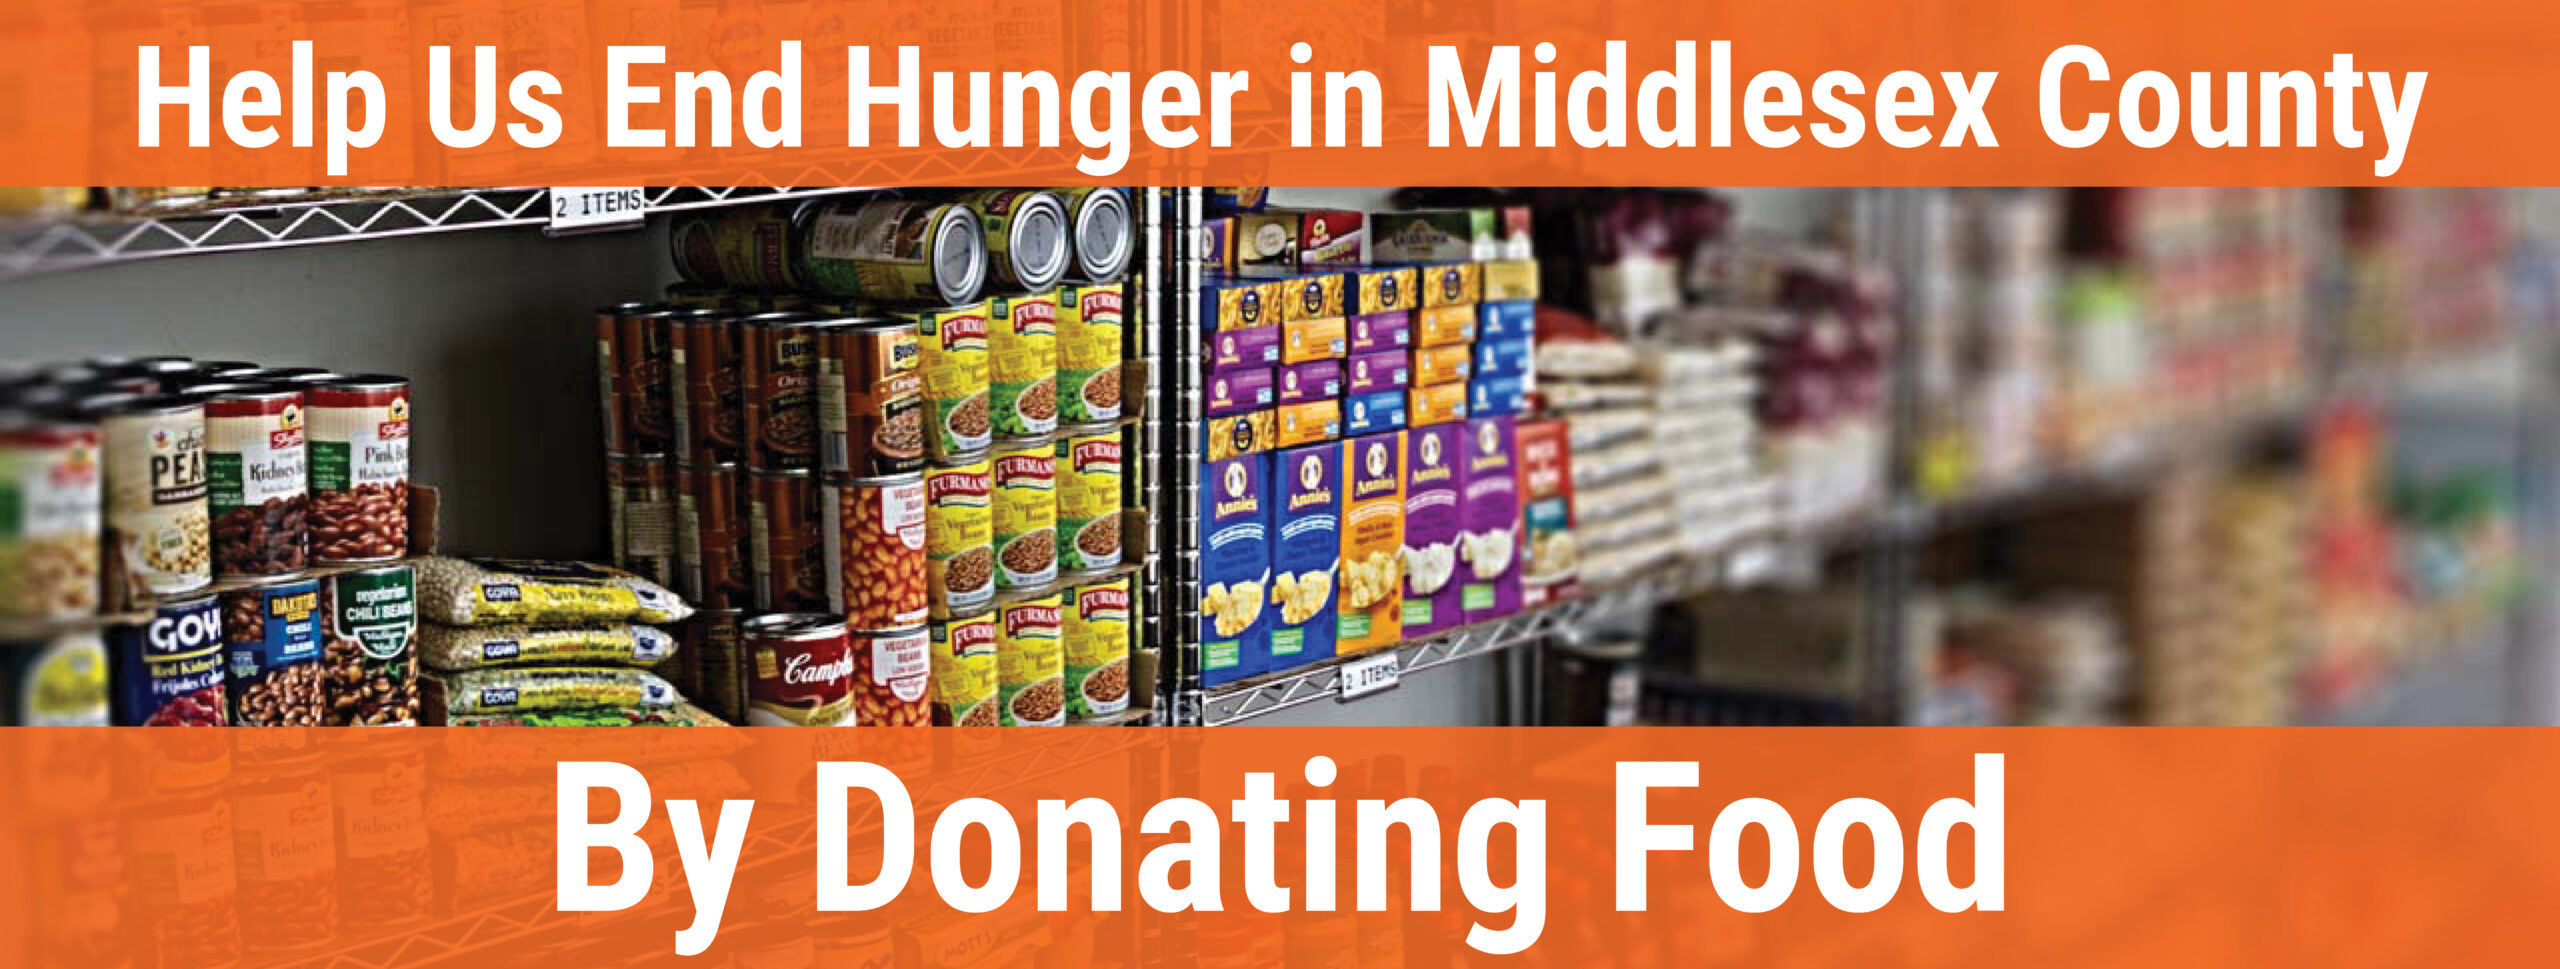 FMC_Home Page Slider_Donating Food